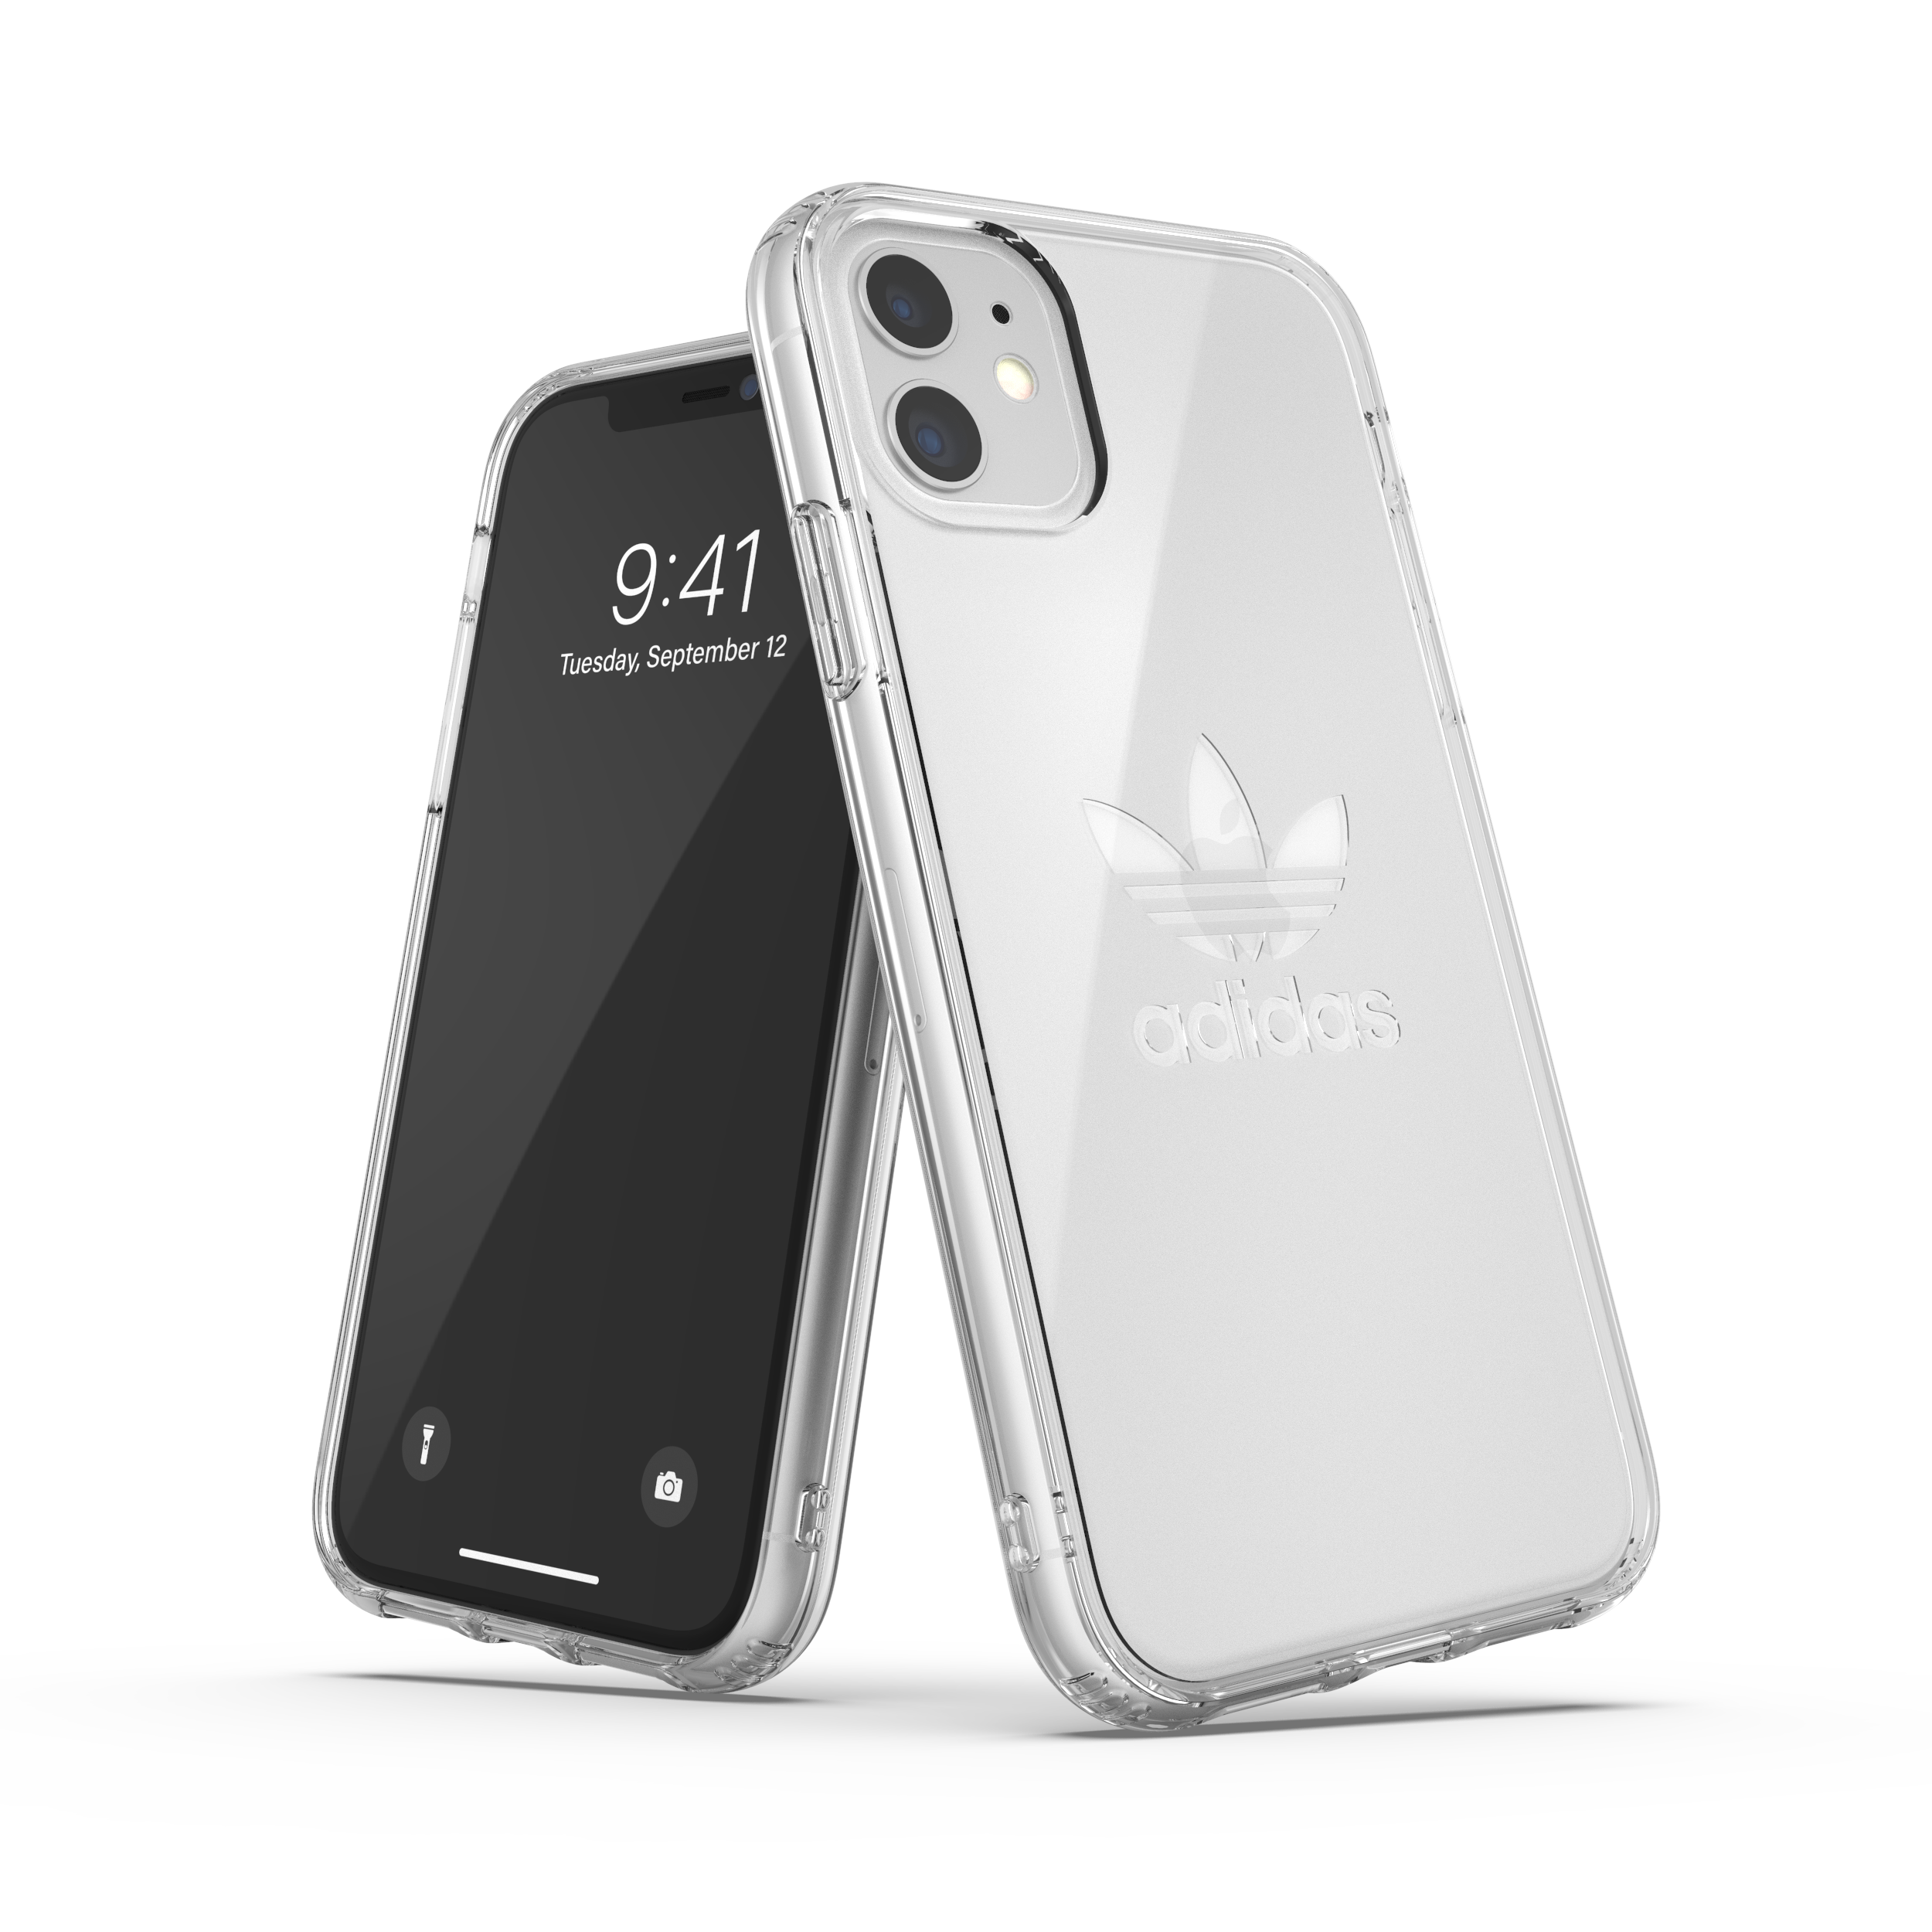 Adidas Originals Protective Phone Case For iPhone 11/XR - Clear